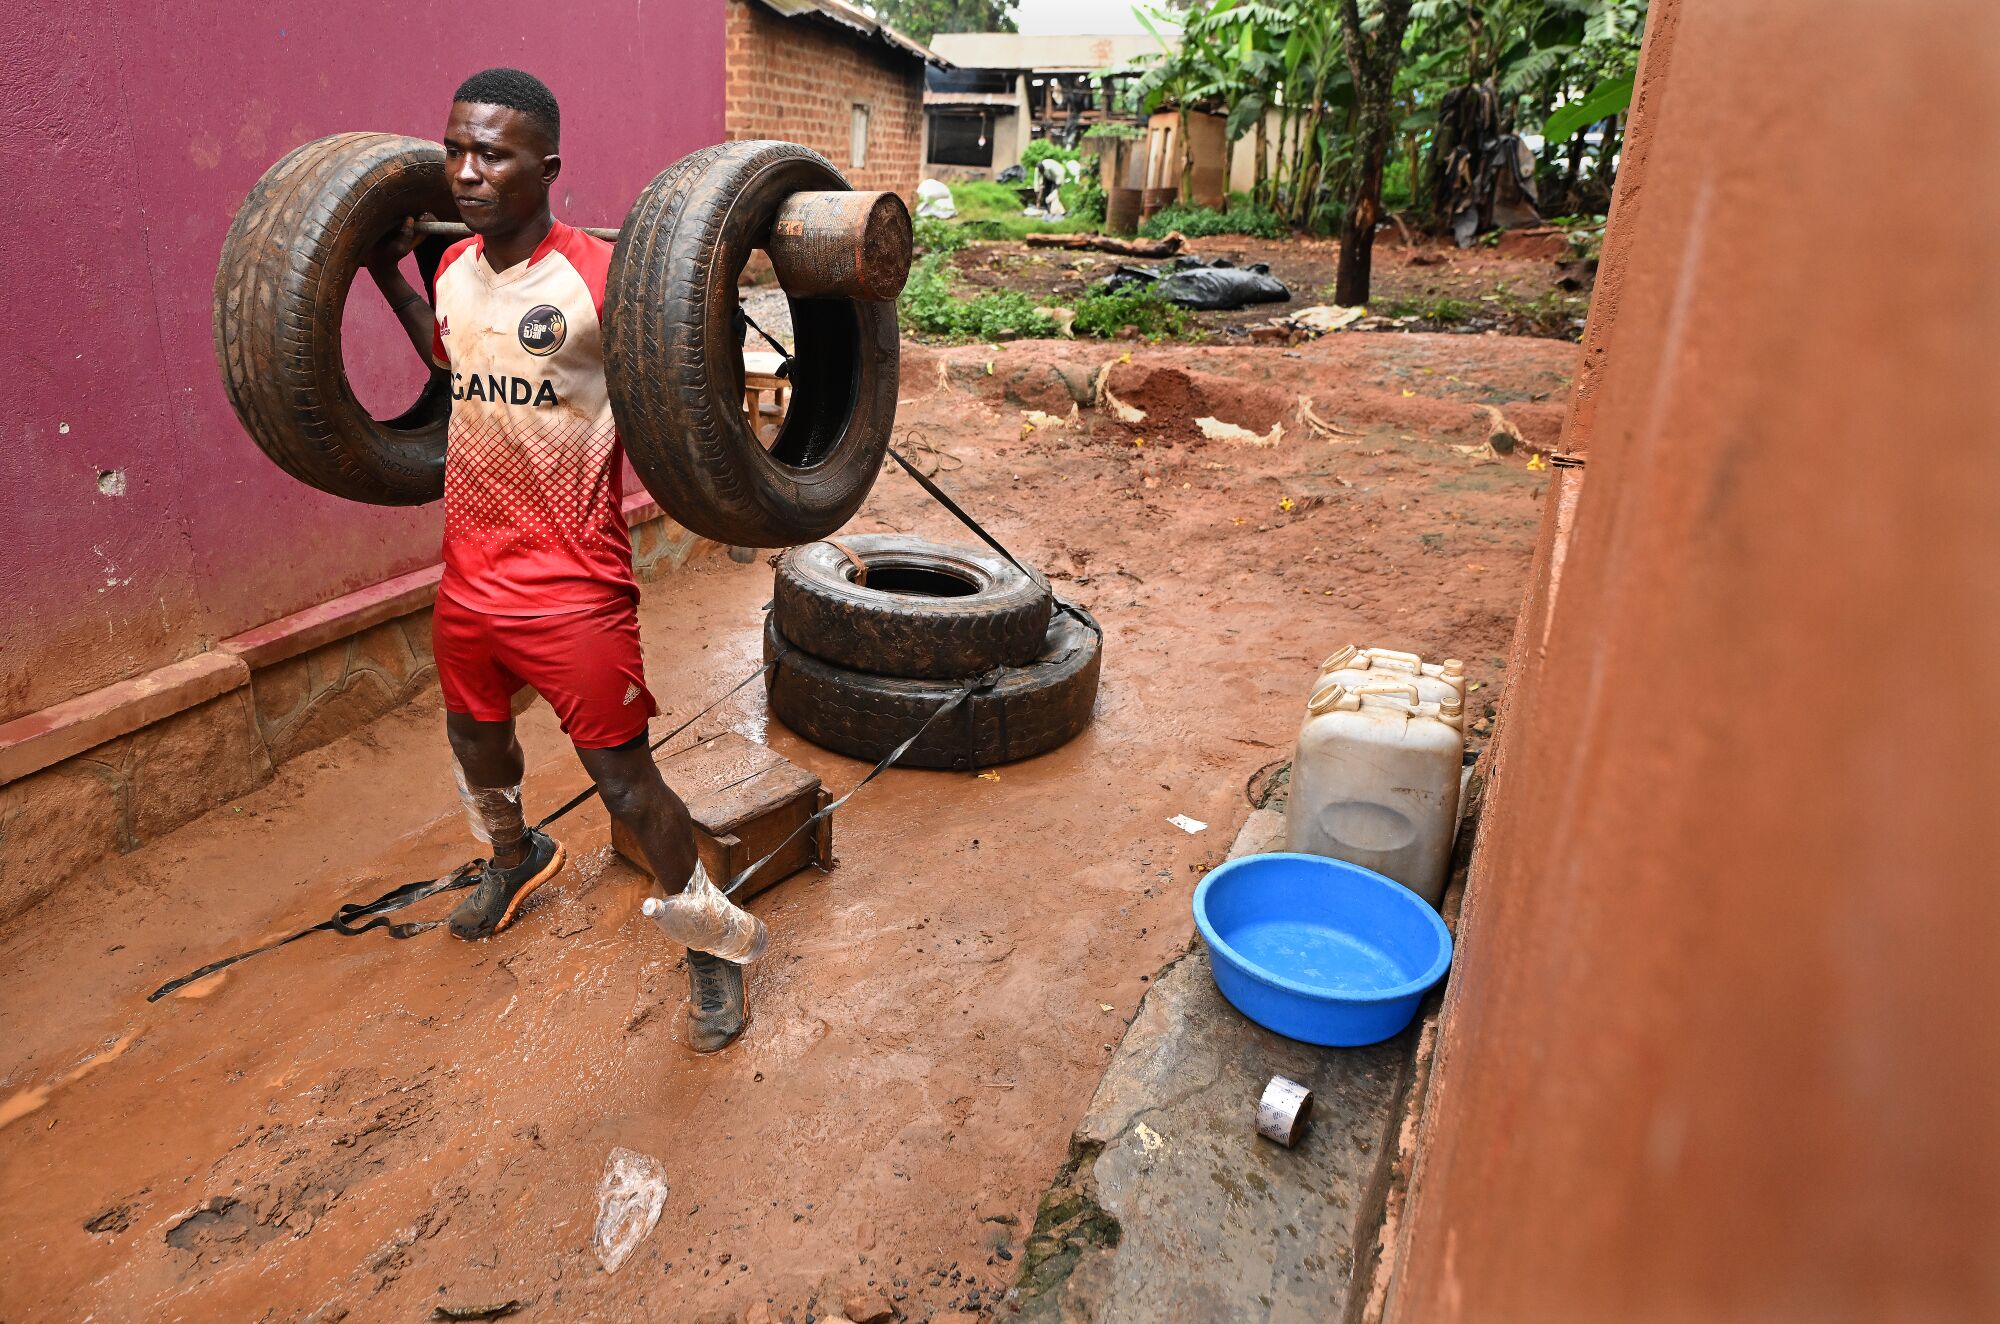 Dennis Kasumba works out with old tires outside his home